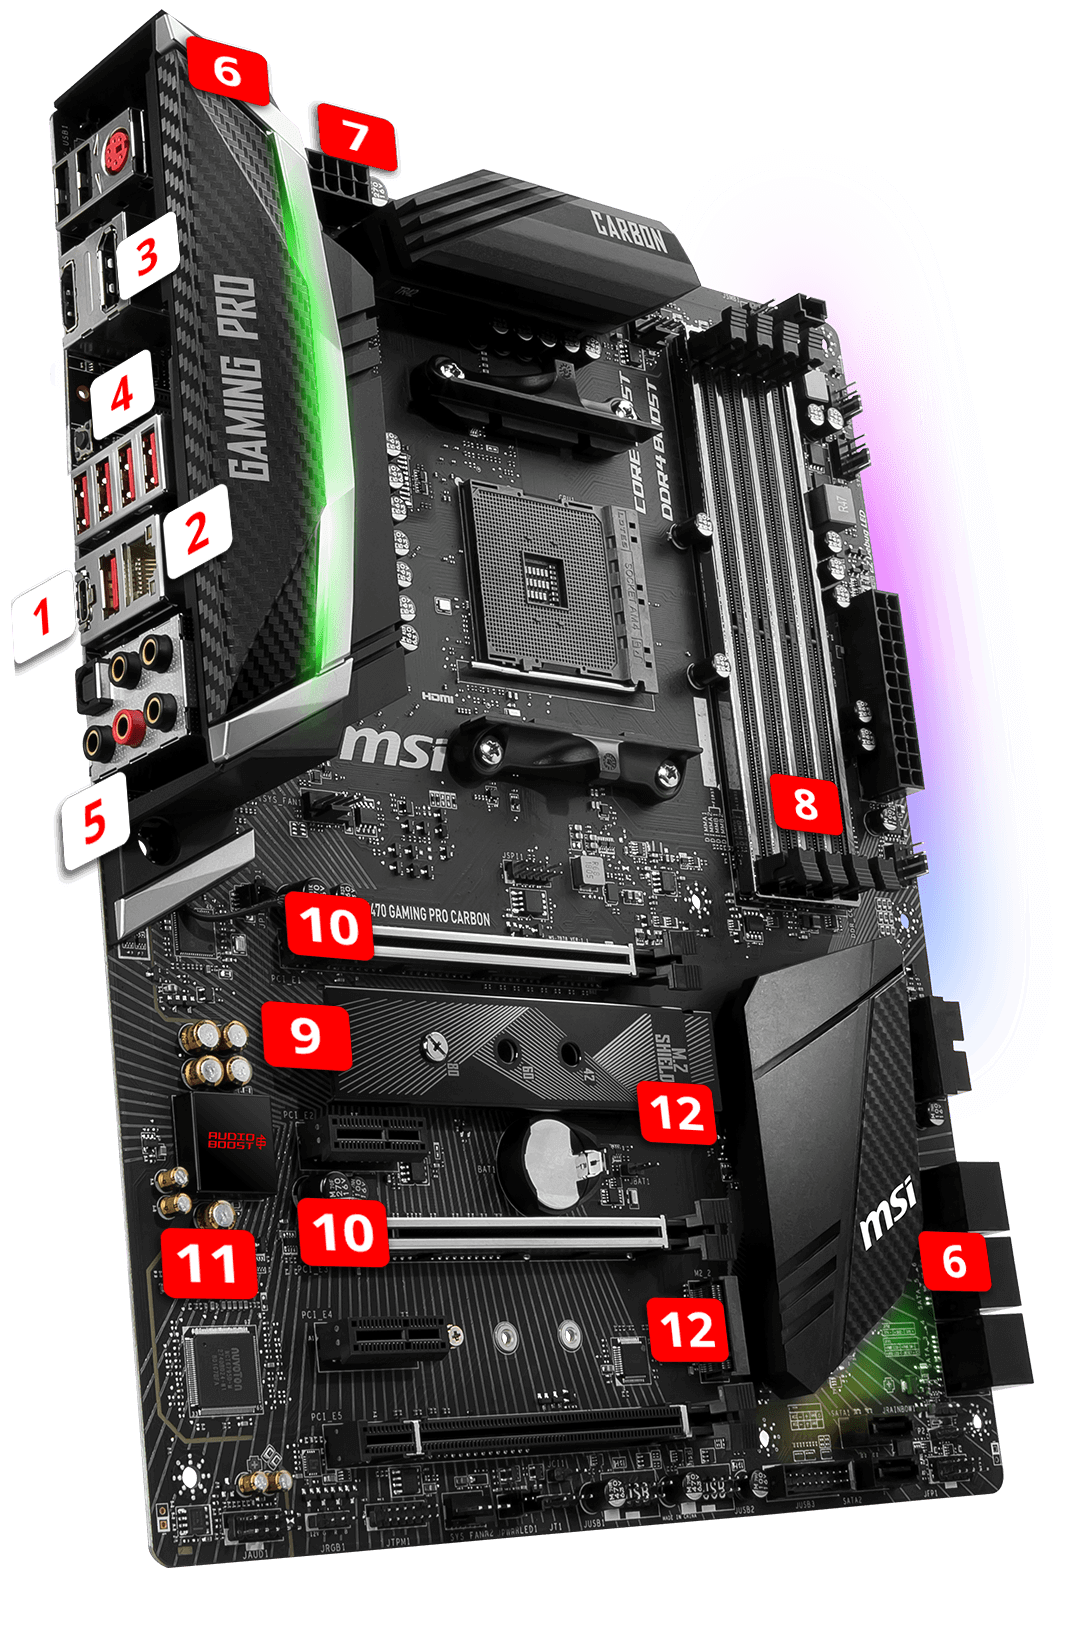 MSI X470 GAMING PRO CARBON overview